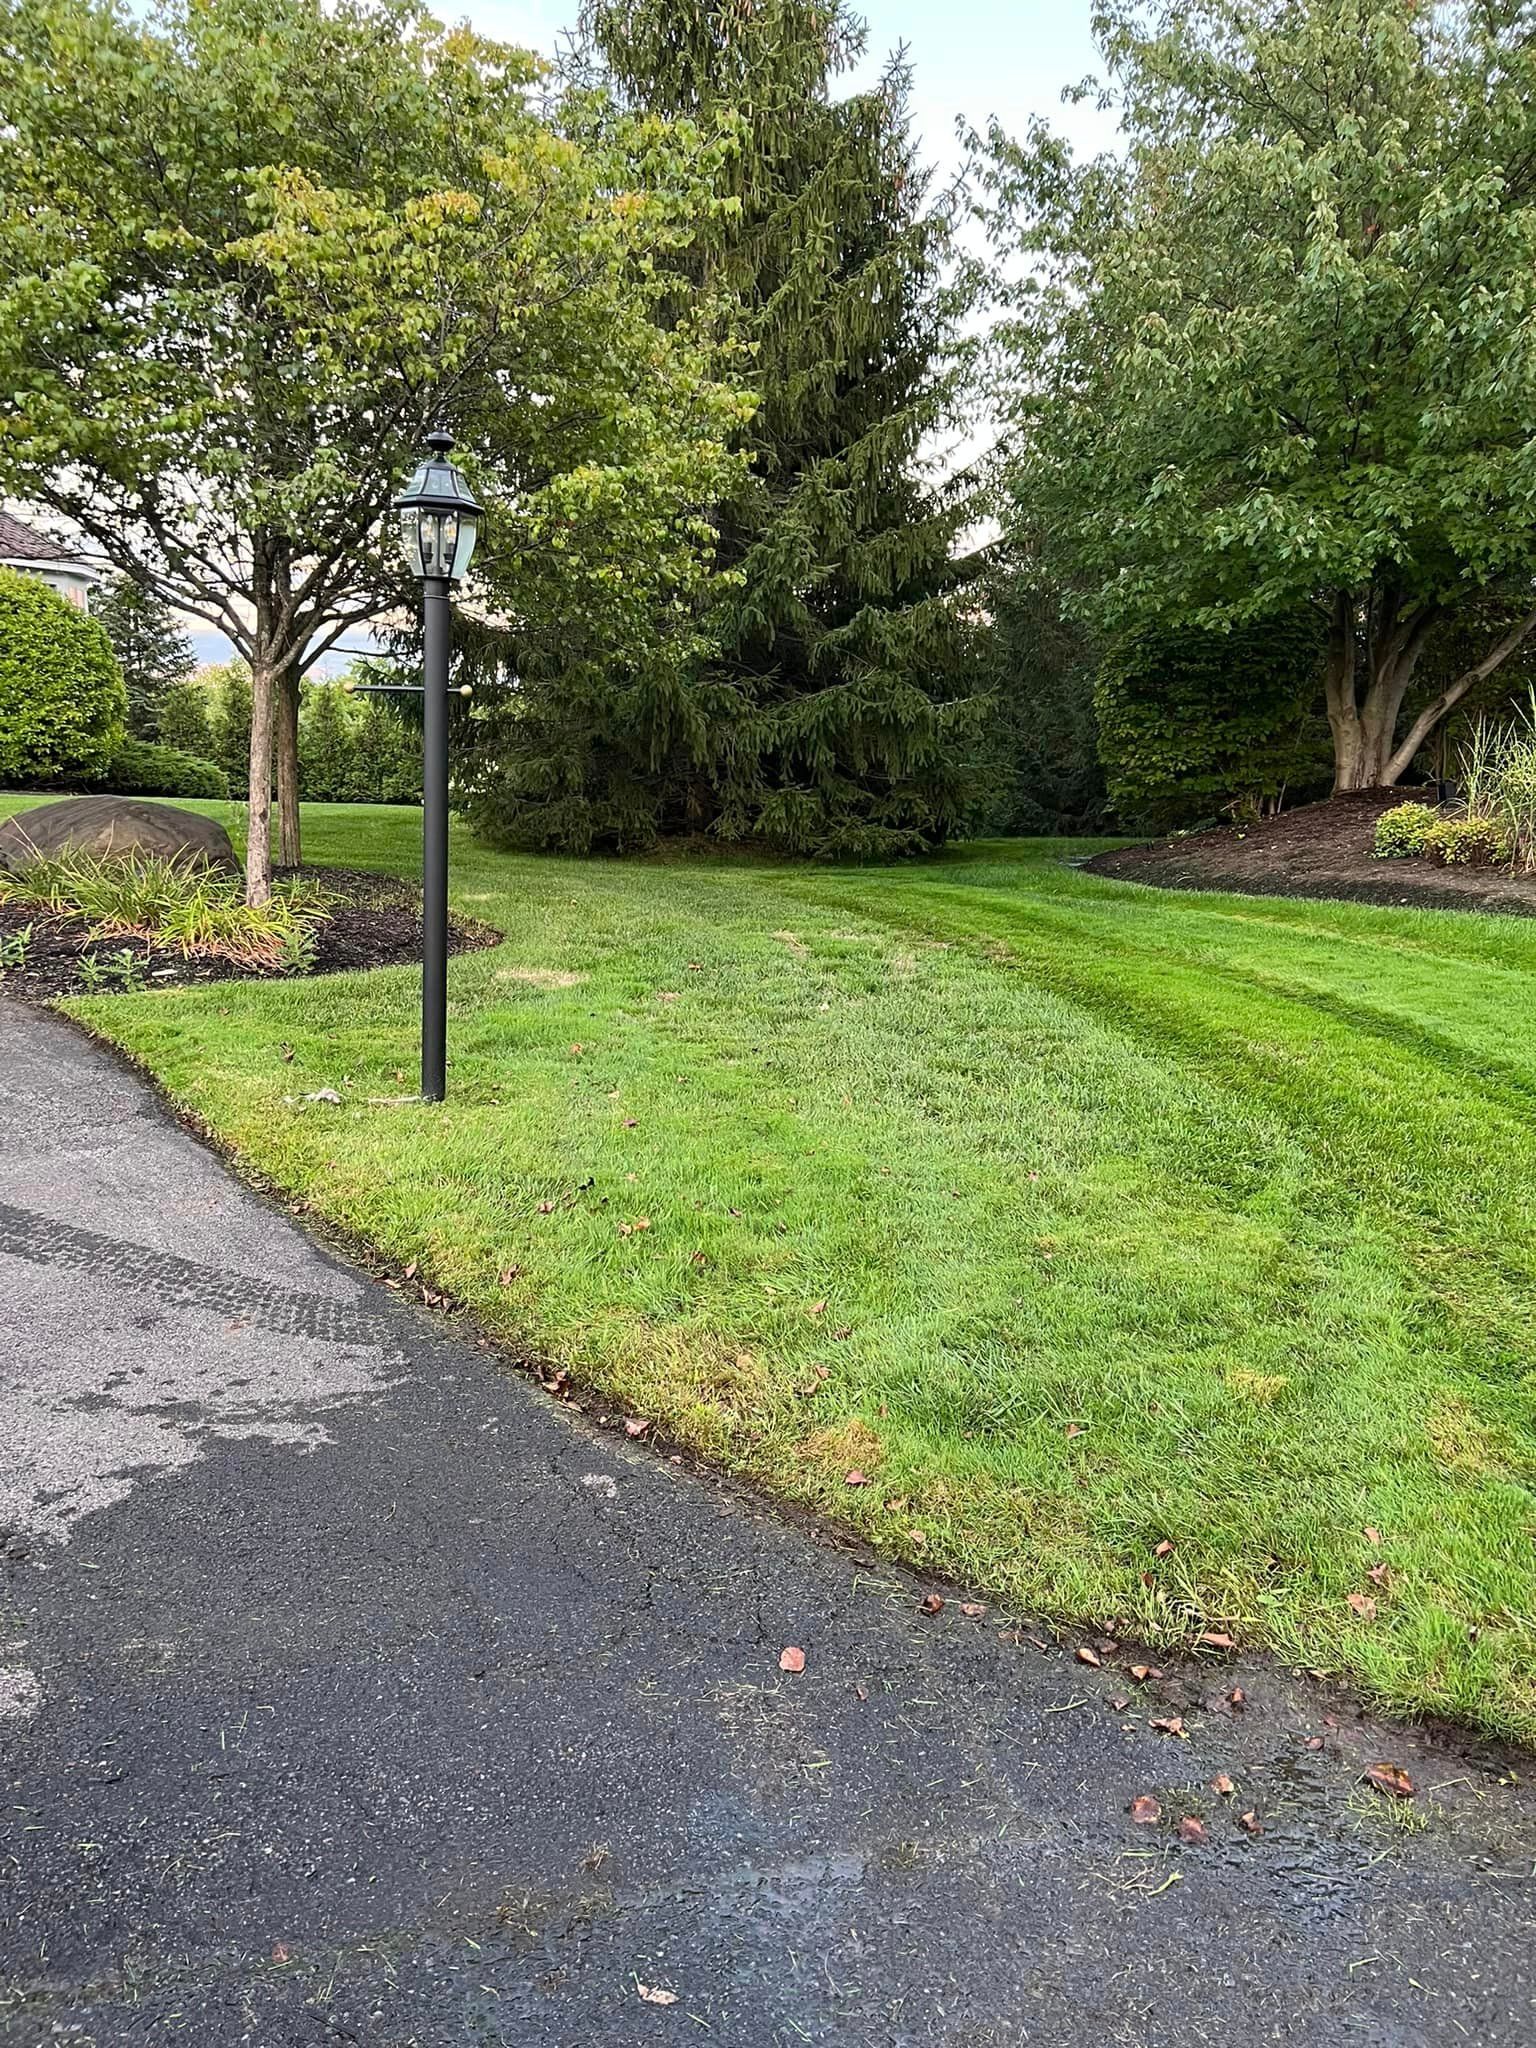 All Photos for Bumblebee Lawn Care LLC in Albany, New York